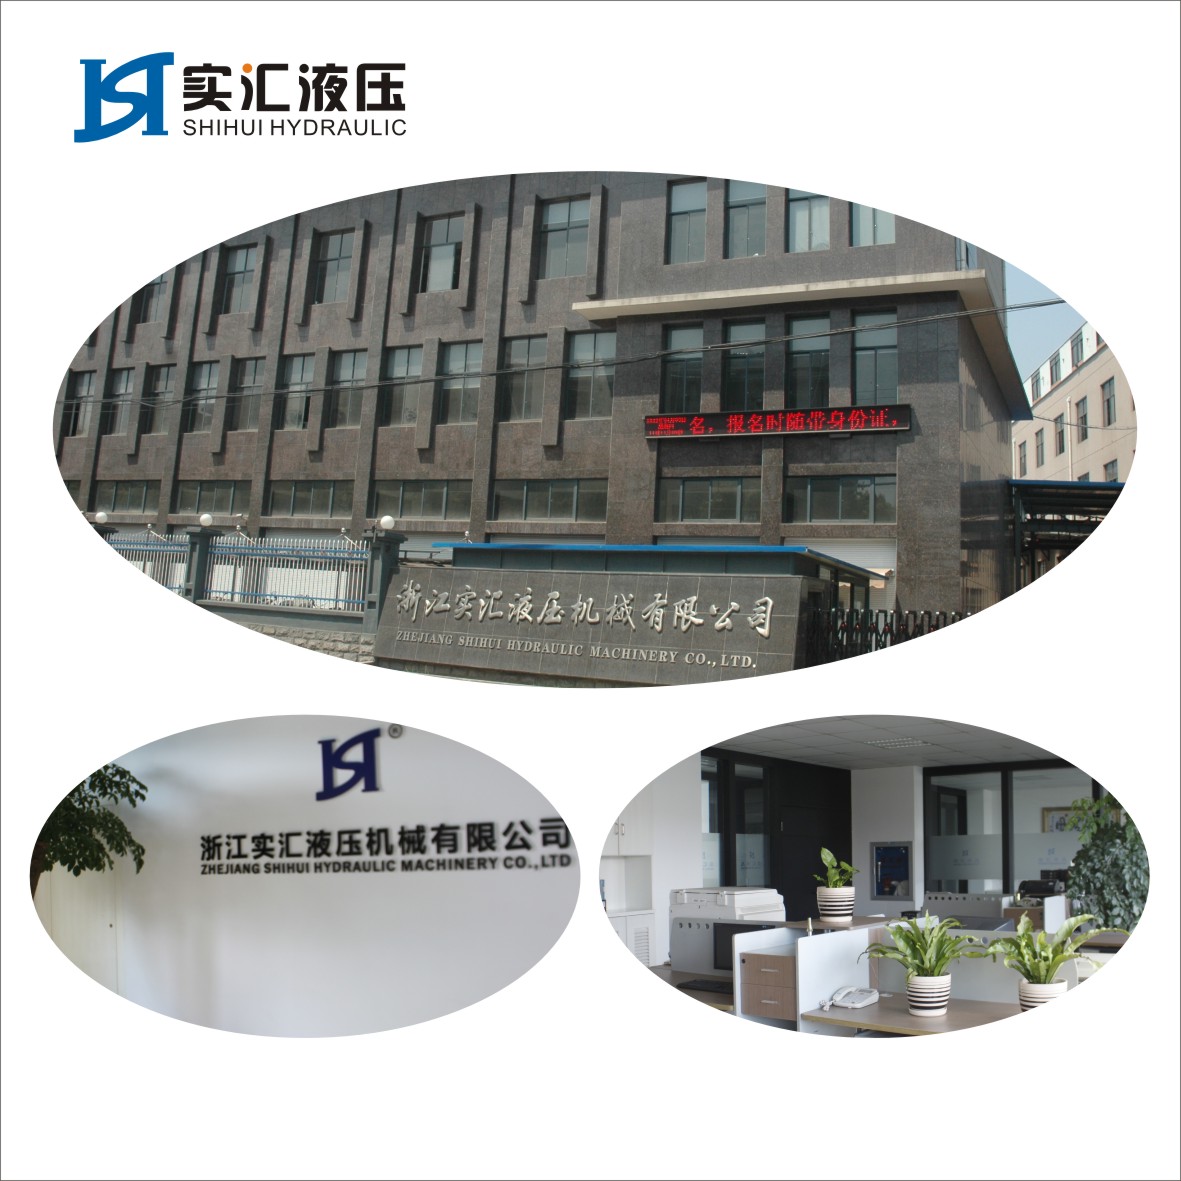 Hydraulic Hose fitting Manufacturer